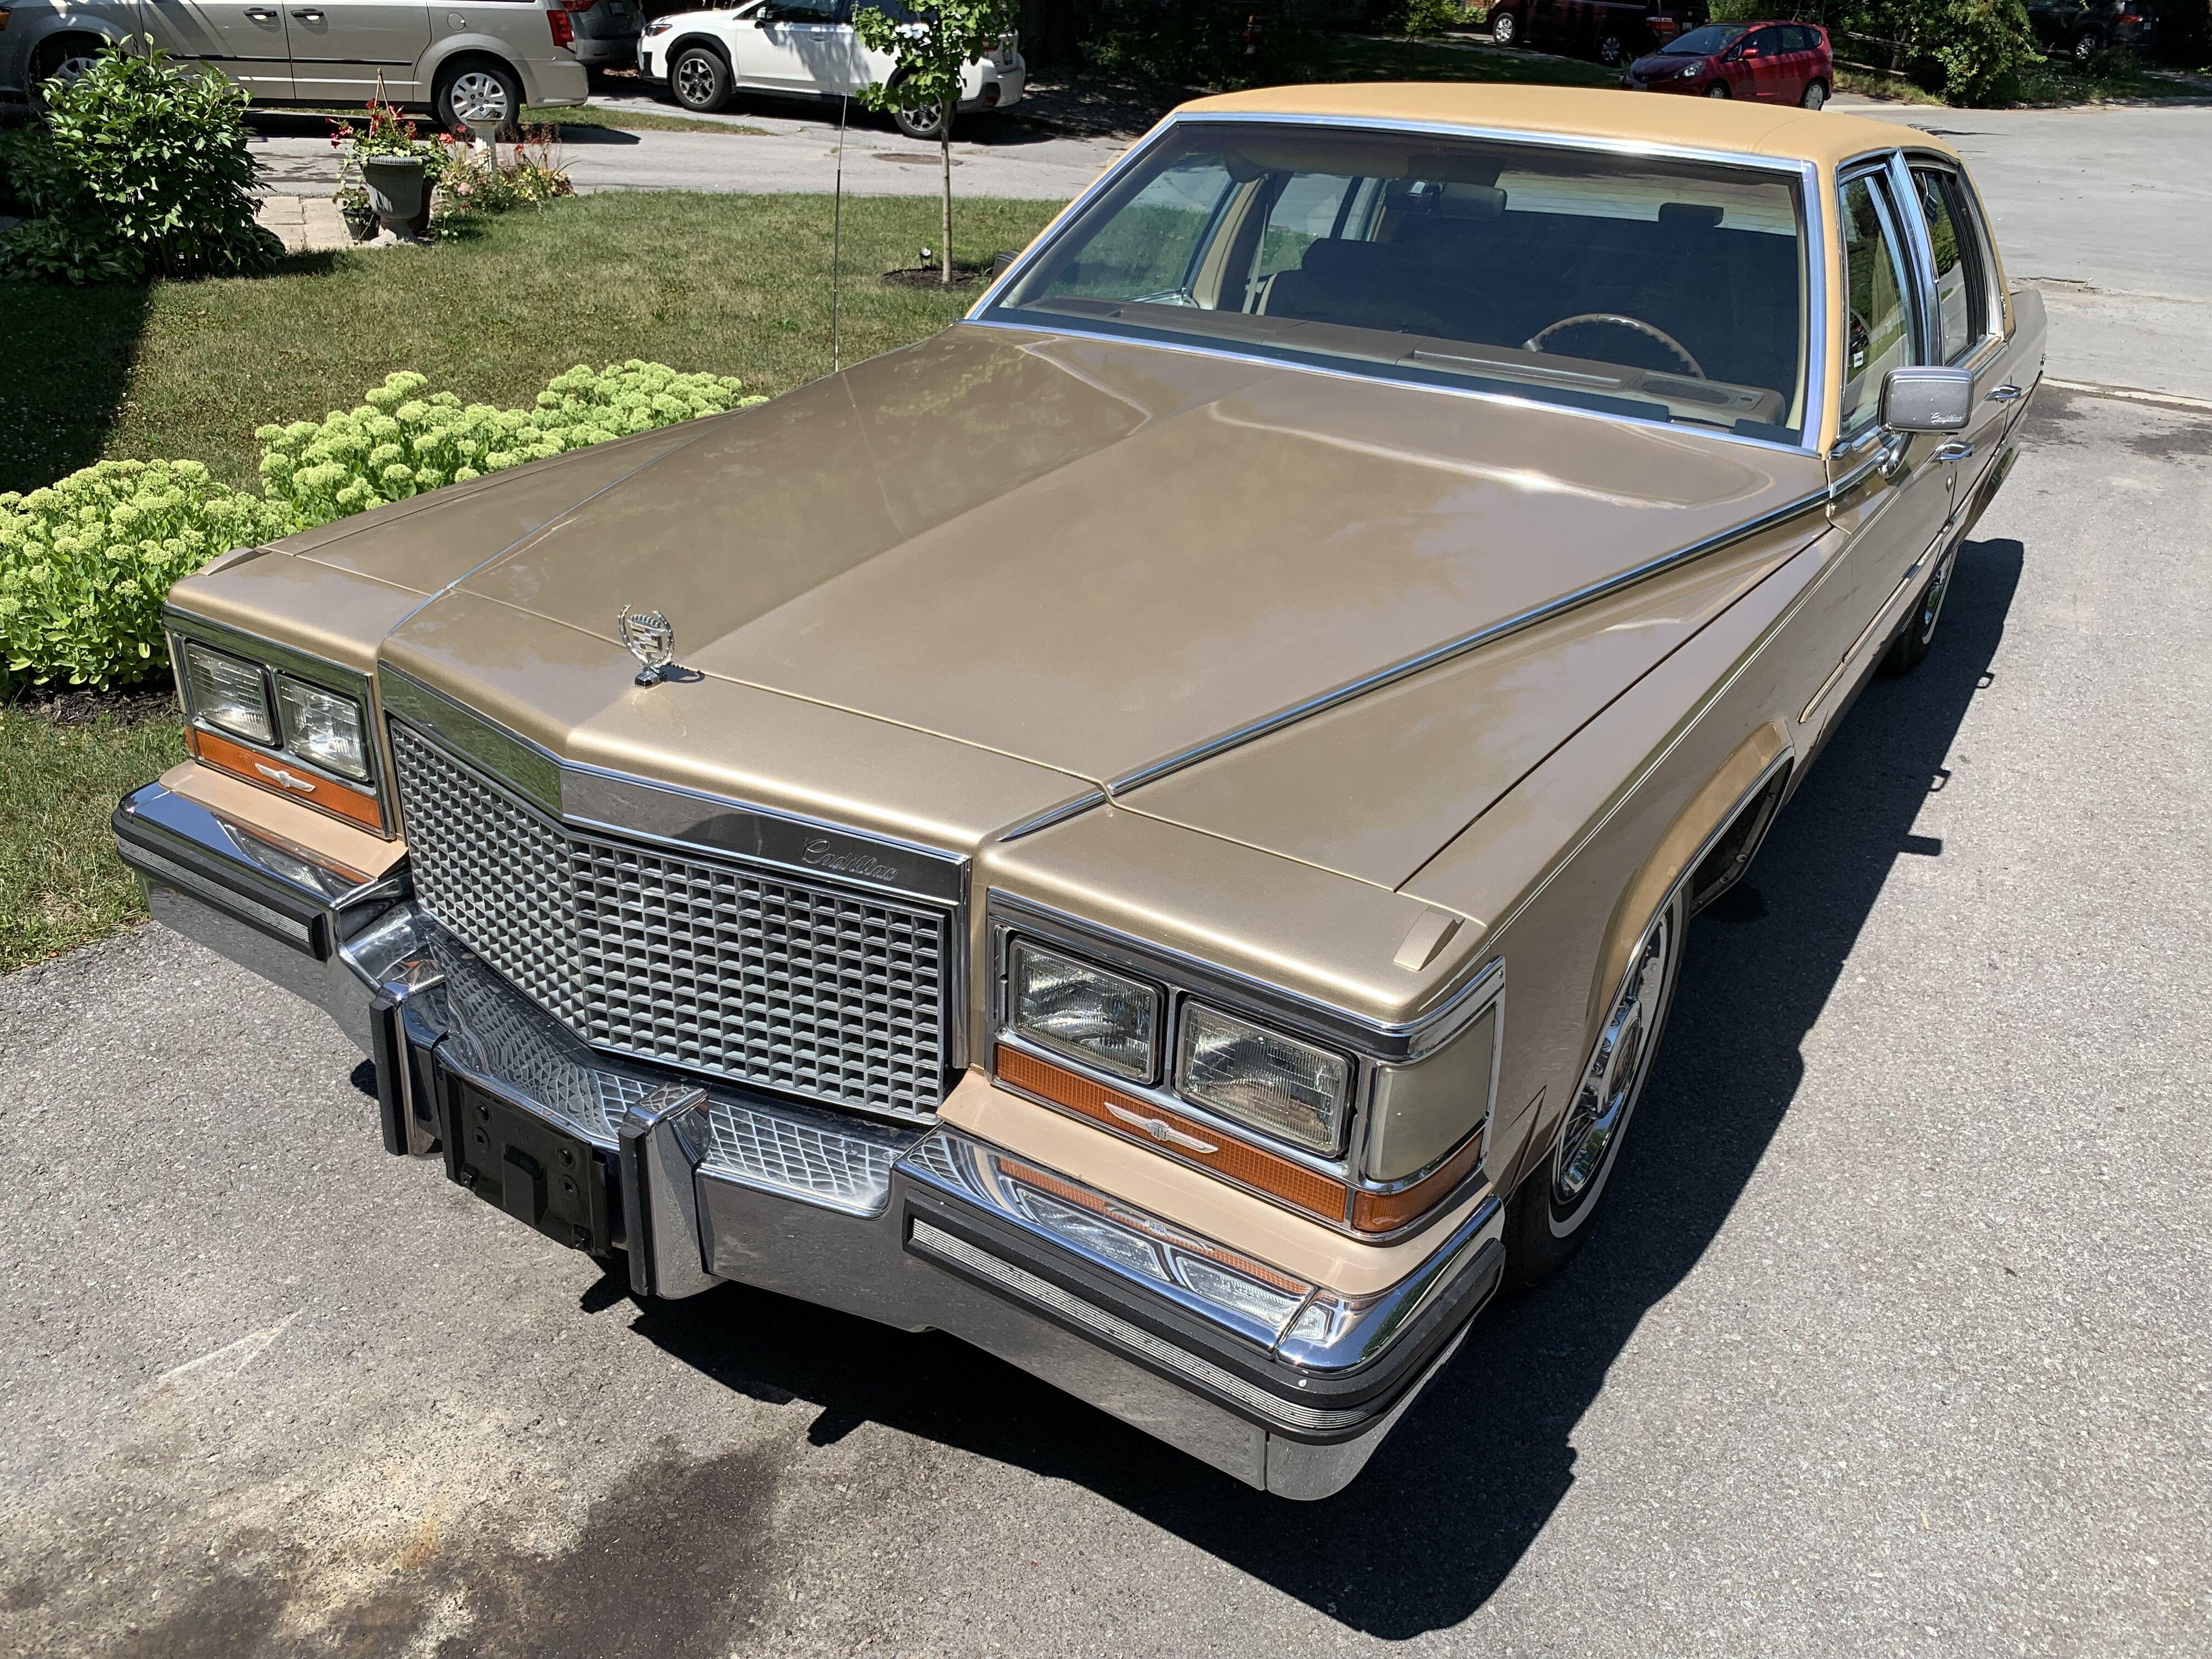 Classic luxury meets modern performance when you restomod a 1987 Cadillac Brougham. Here's how I'd build it.